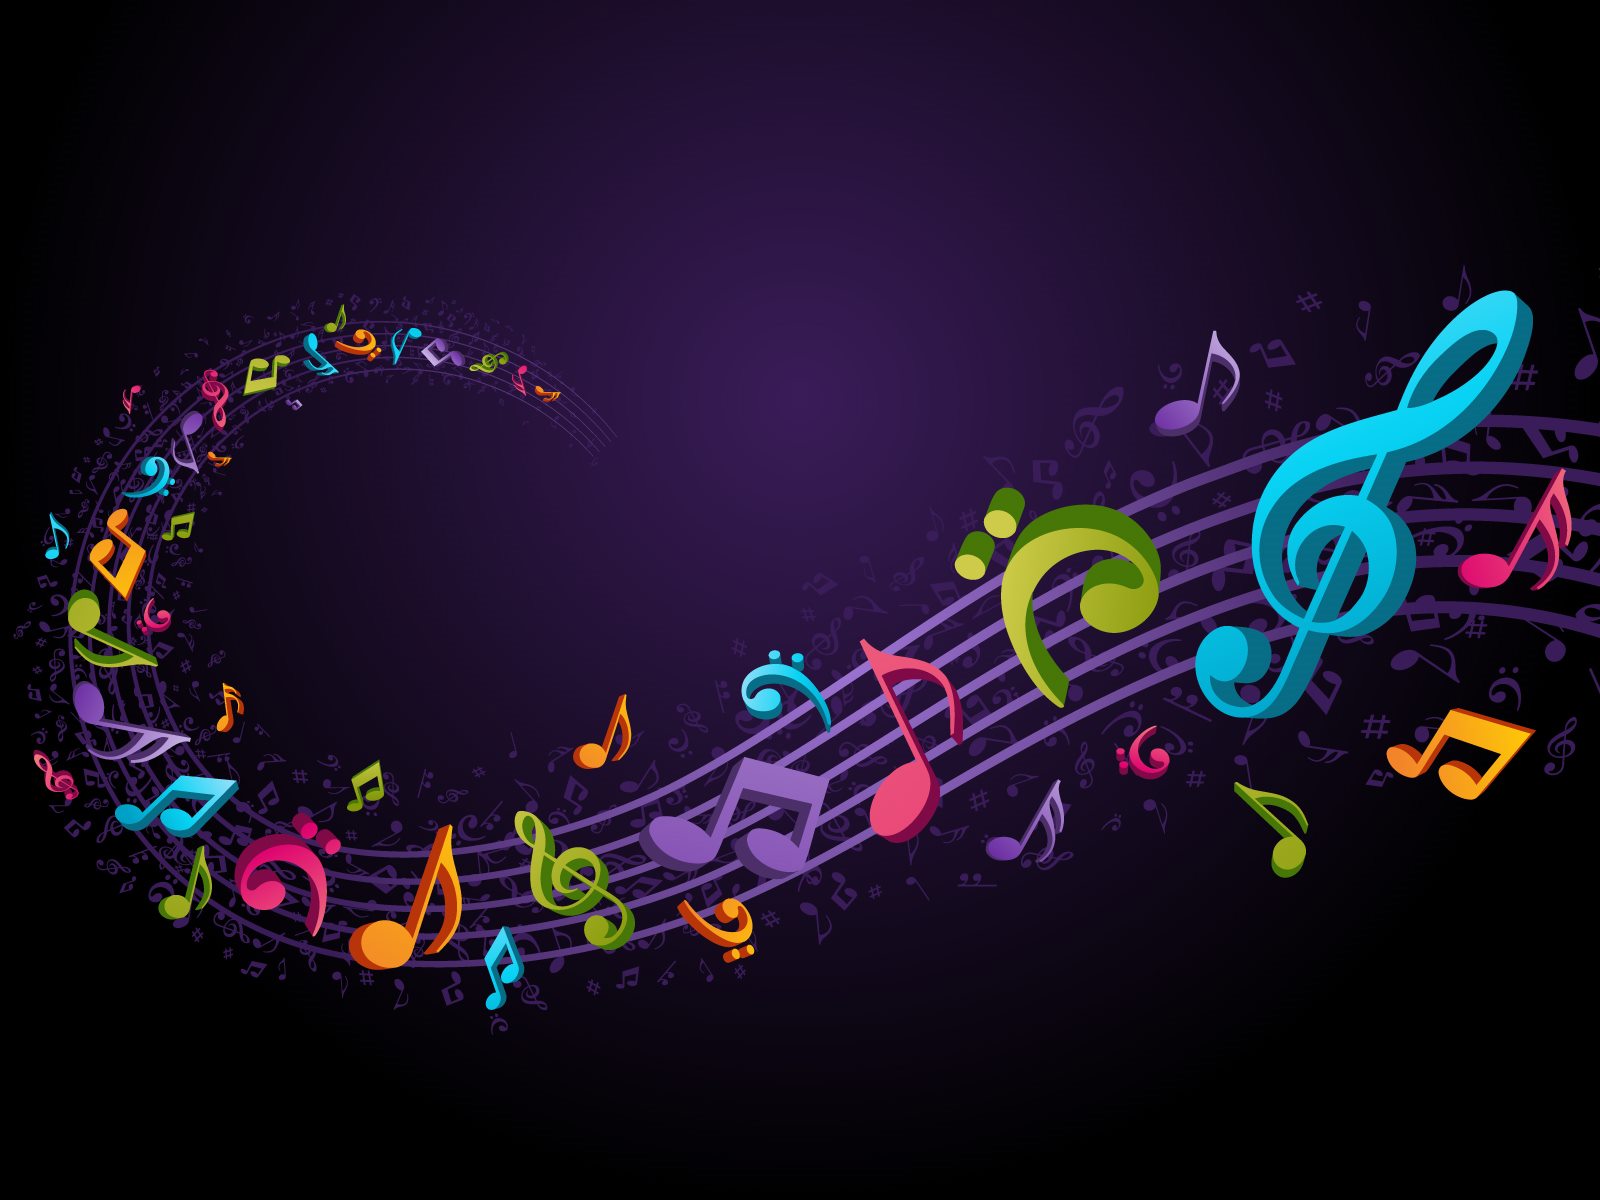 music related wallpapers,text,font,graphic design,purple,design